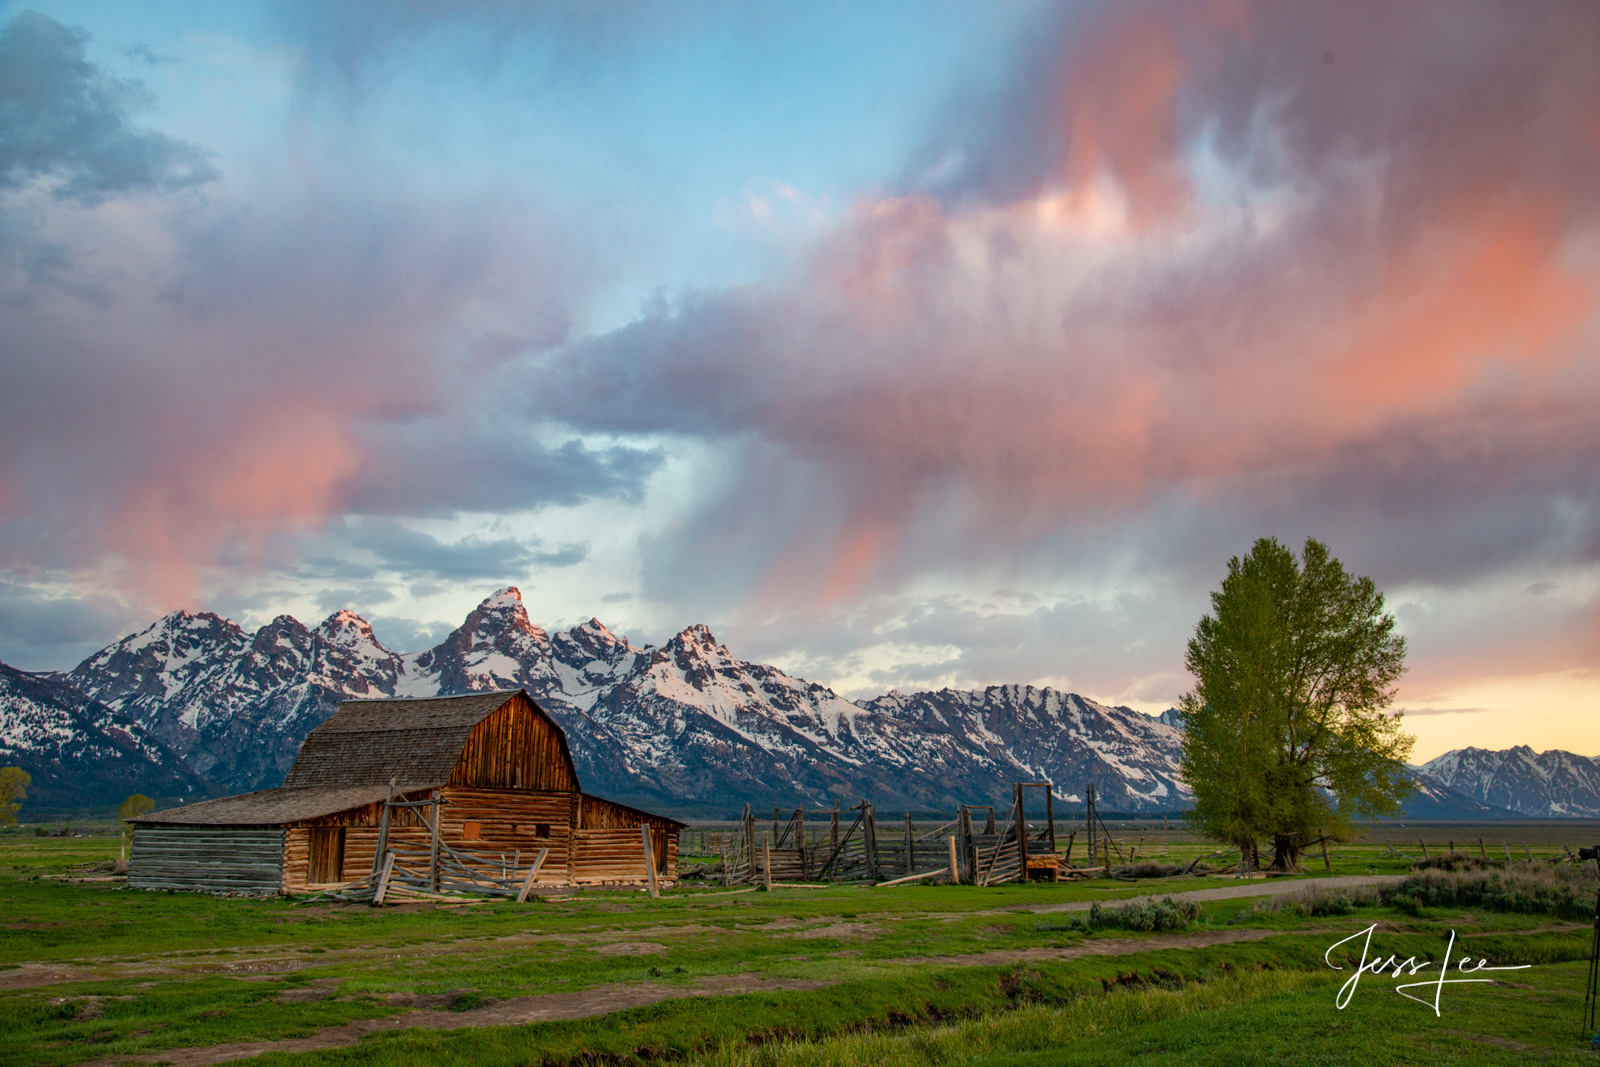 Fine Art Limited Edition of 200 Exclusive high-resolution Museum Quality Photography Prints of Teton Barn at Sunrise. To see...